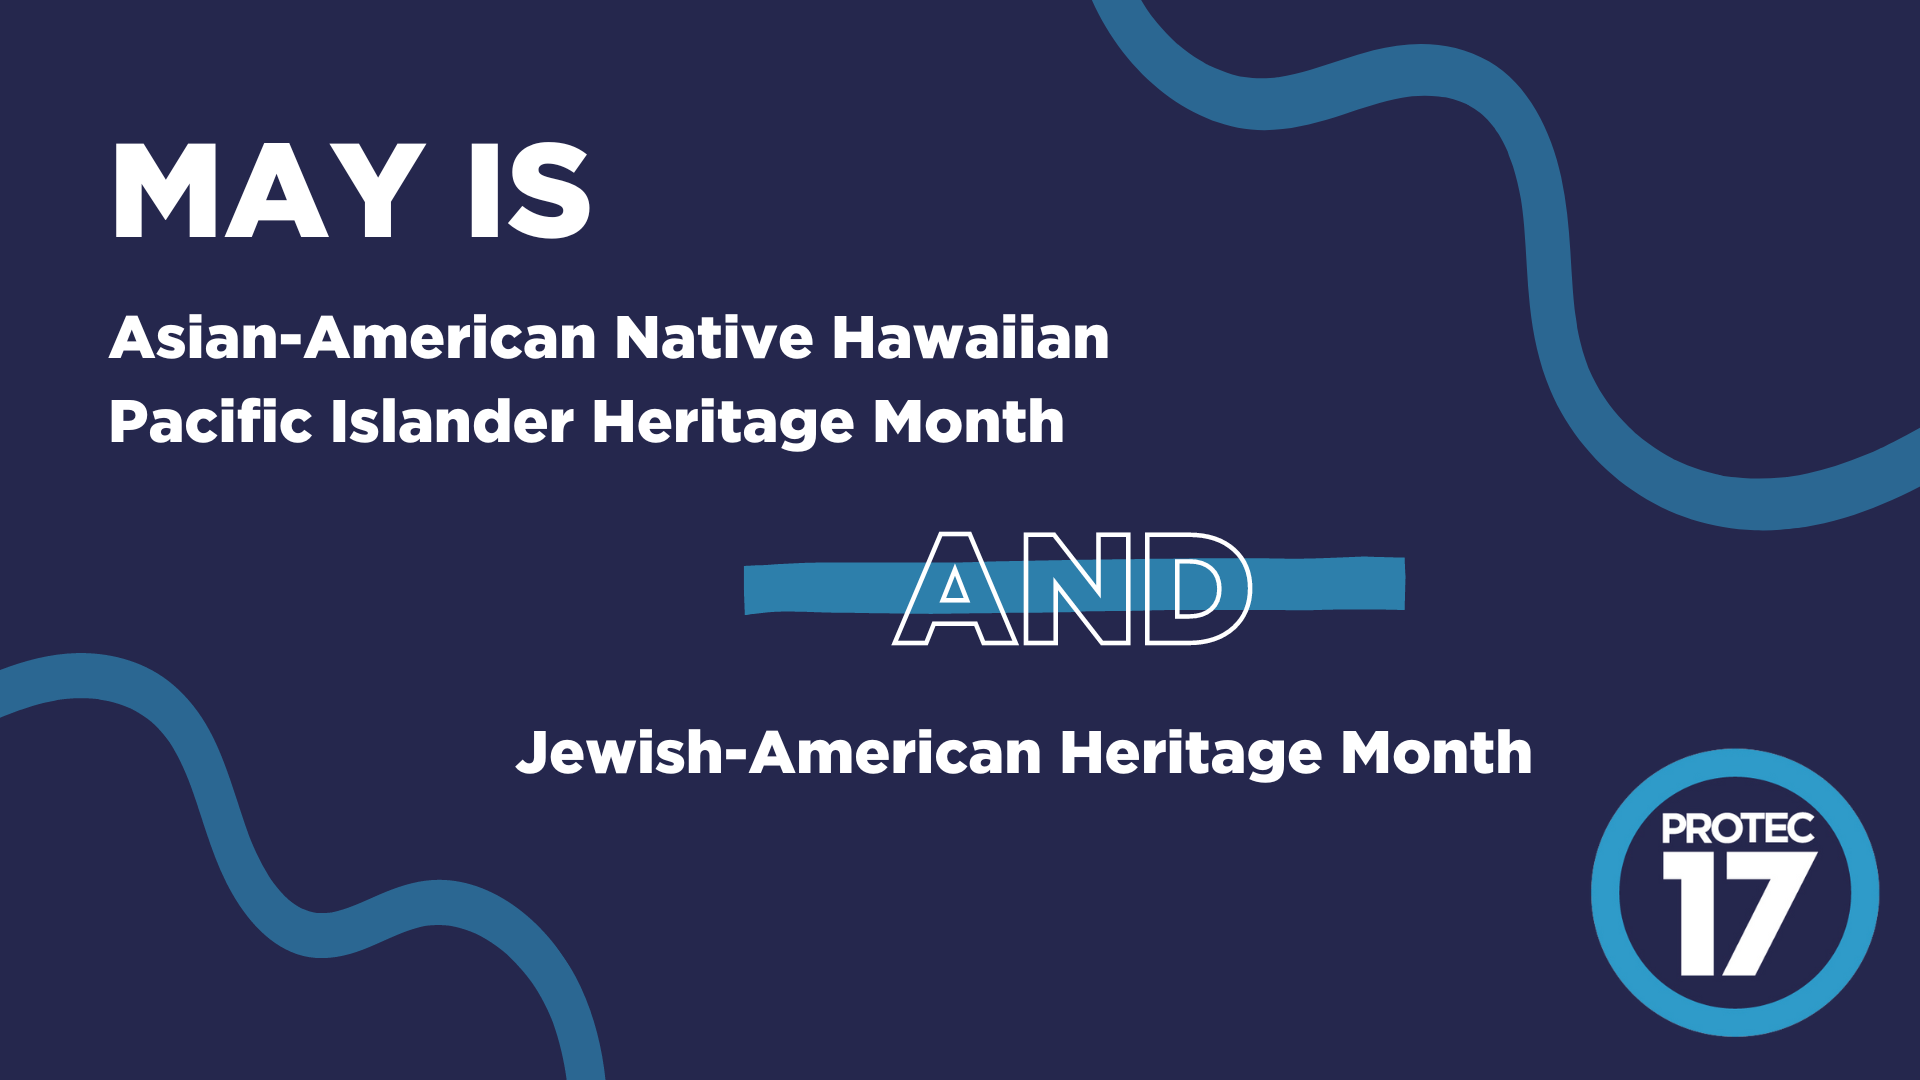 Text reads, "MAY IS Asian-American Native Hawaiian Pacific Islander Heritage Month AND Jewish-American Heritage Month." There are squiggly lines decorating the image and the PROTEC17 logo in the bottom right.